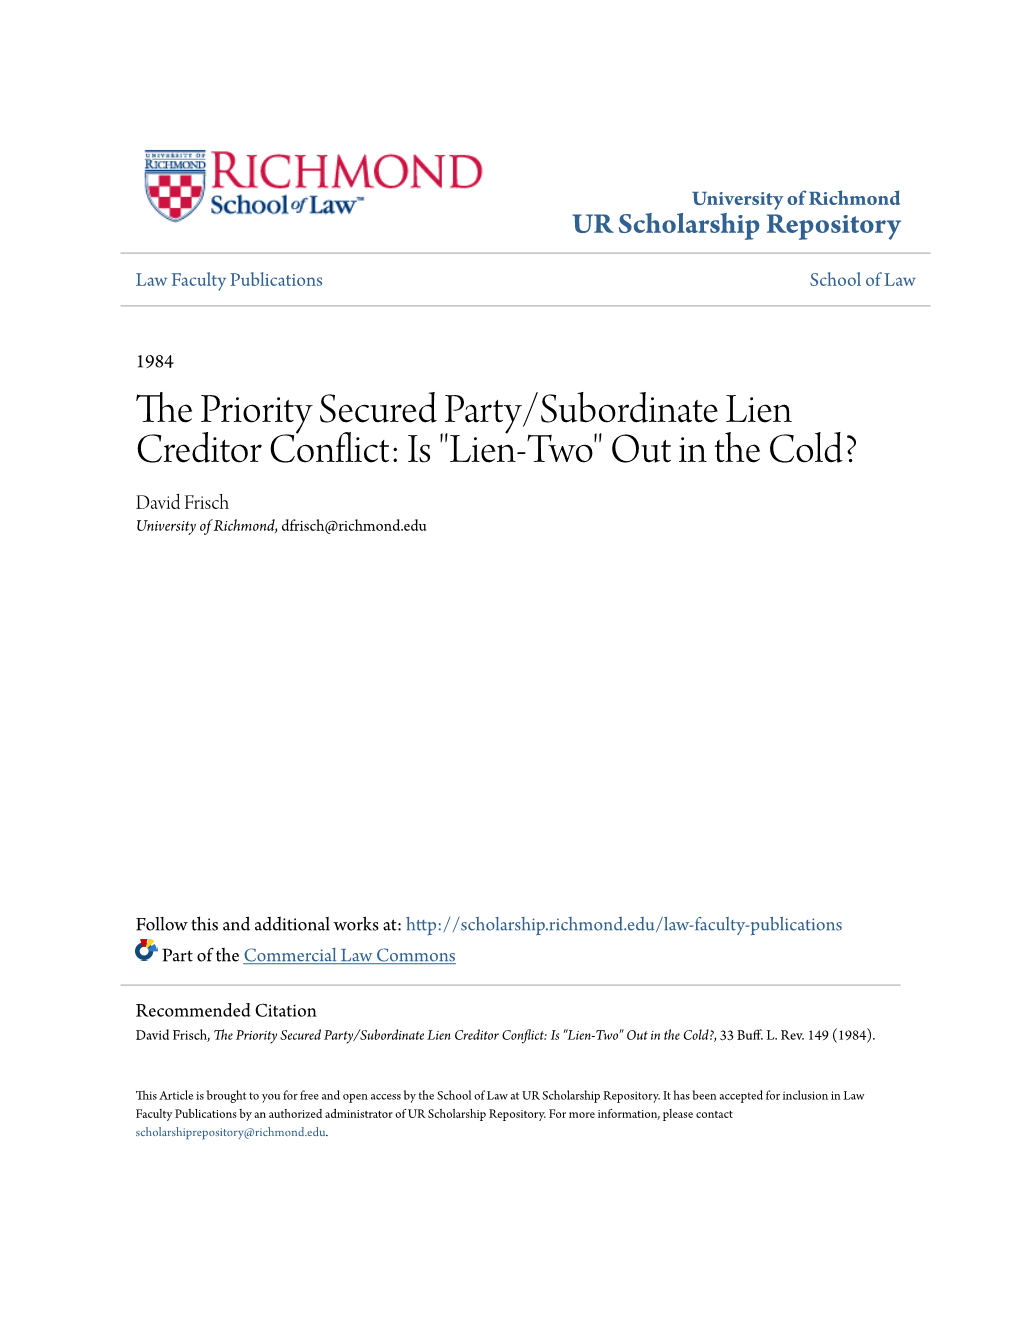 The Priority Secured Party/Subordinate Lien Creditor Conflict: Is "Lien-Two" out in the Cold?, 33 Buff